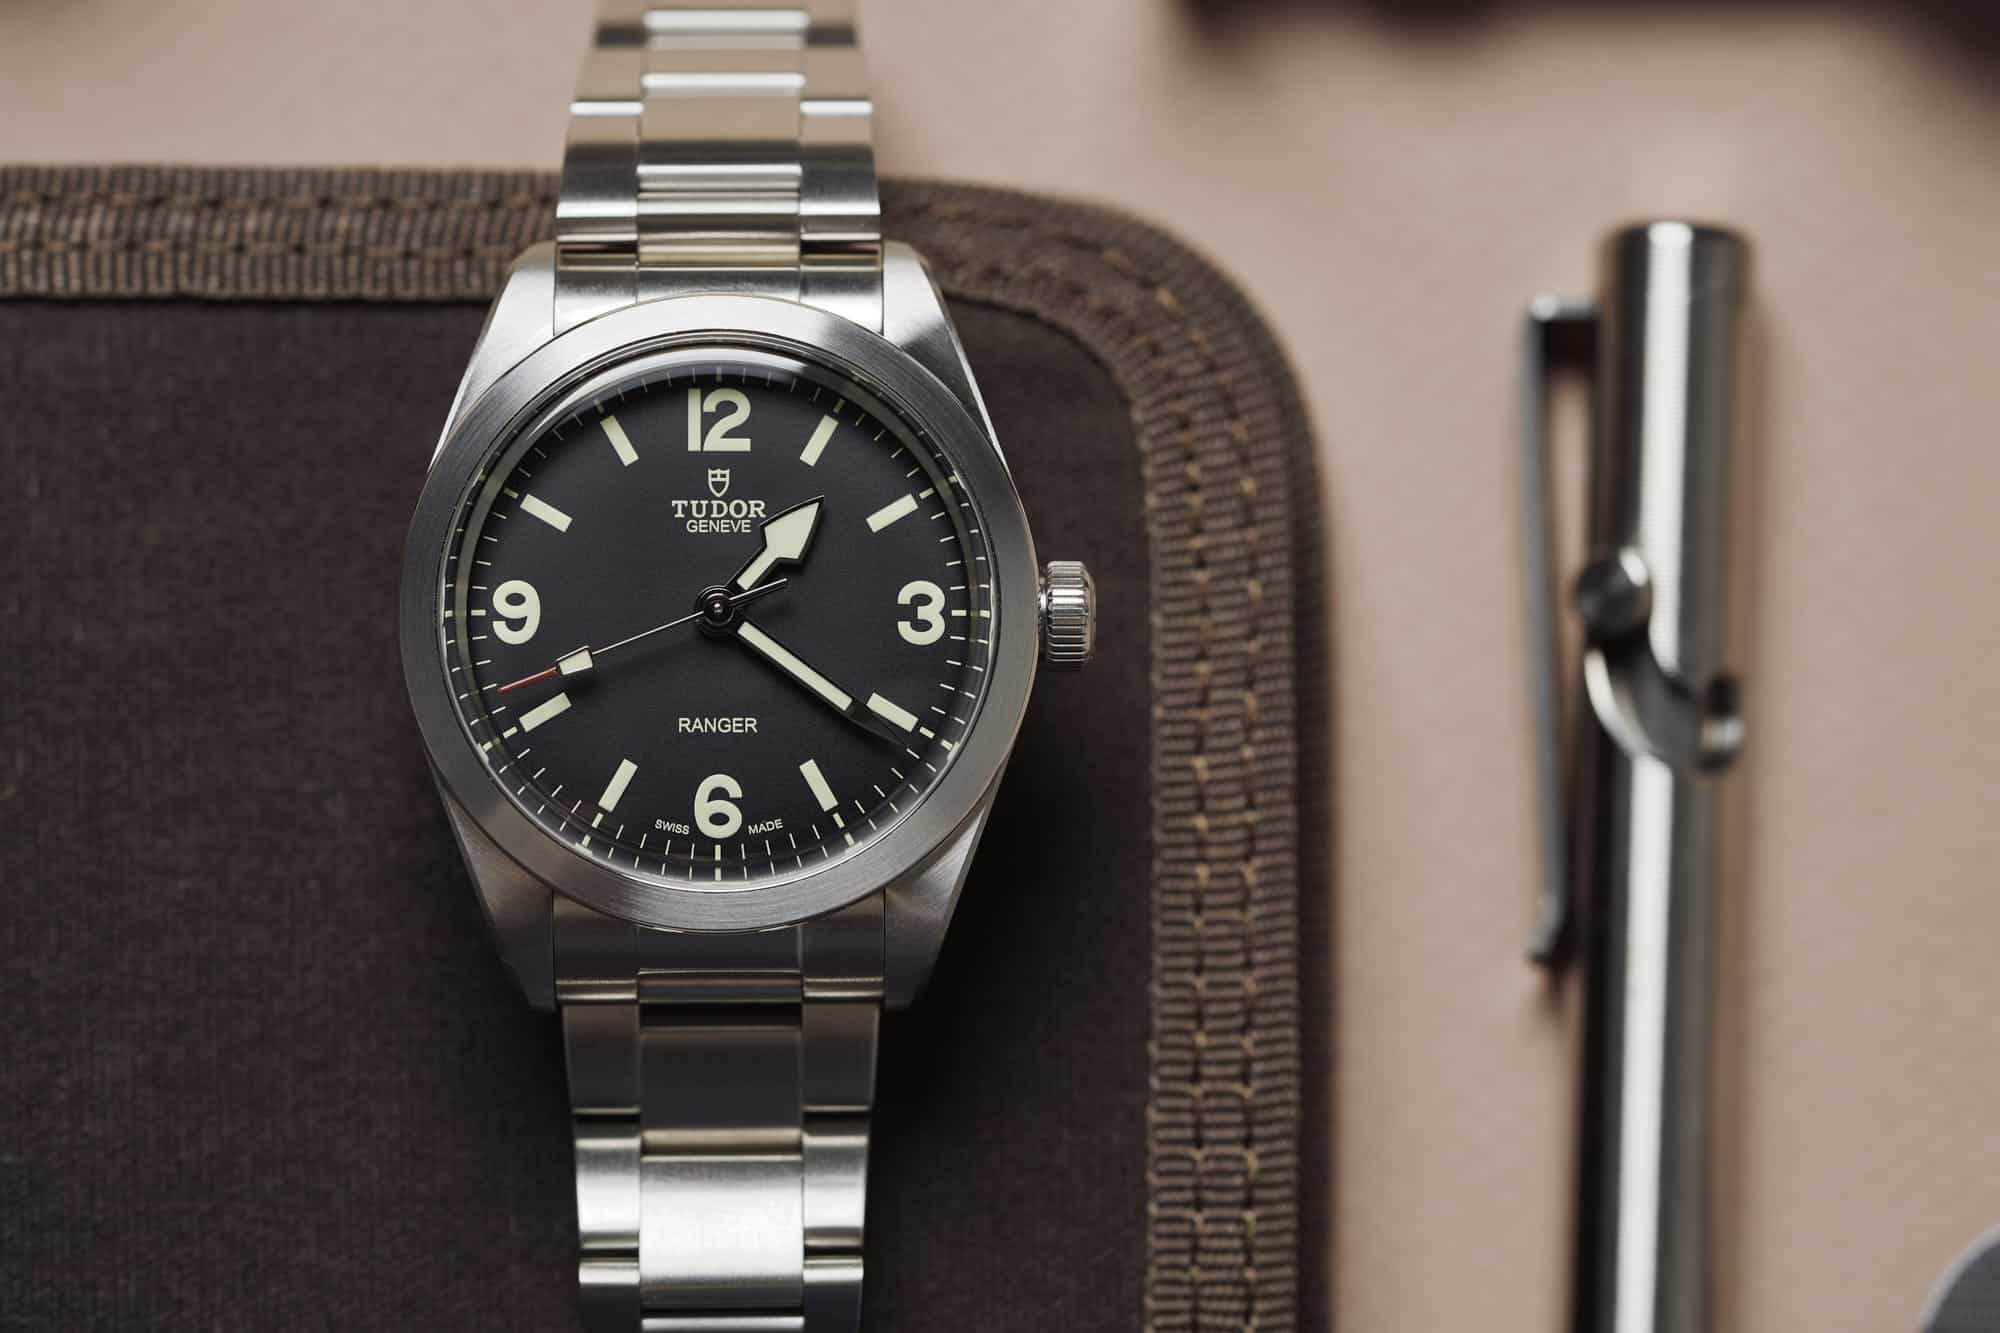 [VIDEO] Review: The 39mm Tudor Ranger Through the Eyes of a Rolex Explorer Owner